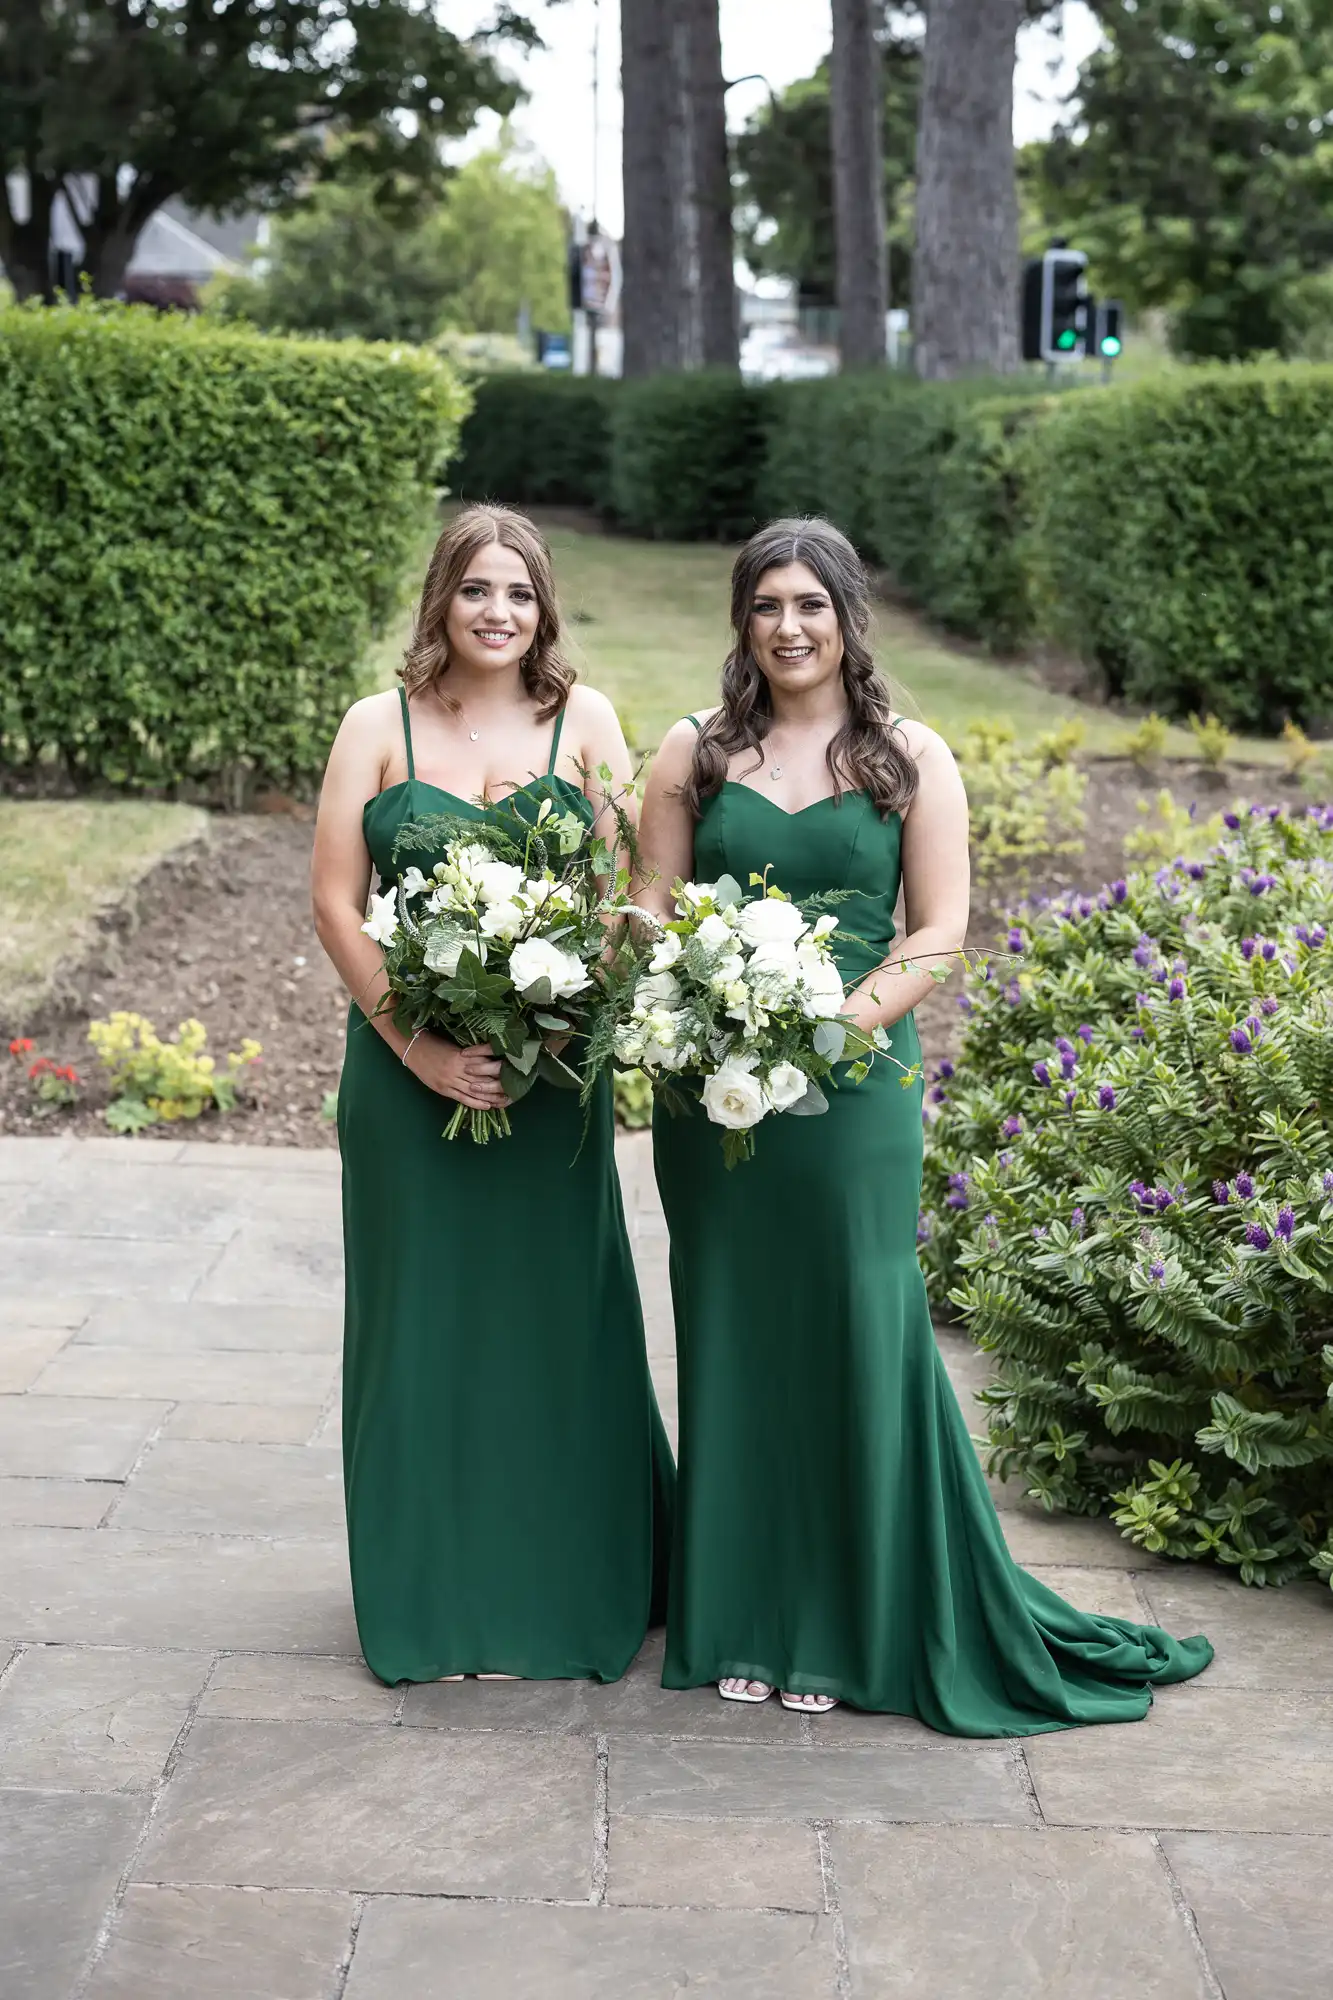 Two women in elegant green dresses holding bouquets, standing on a garden path surrounded by lush greenery.